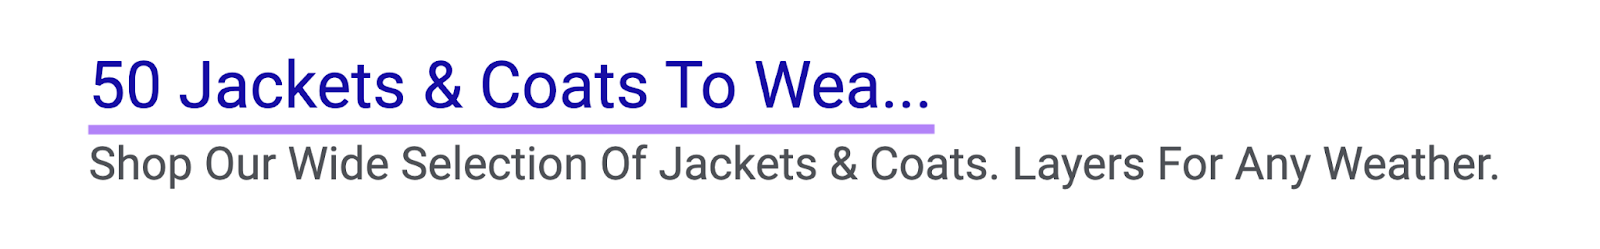 Truncated sitelink text that reads "50 Jackets & Coats to Wea..."